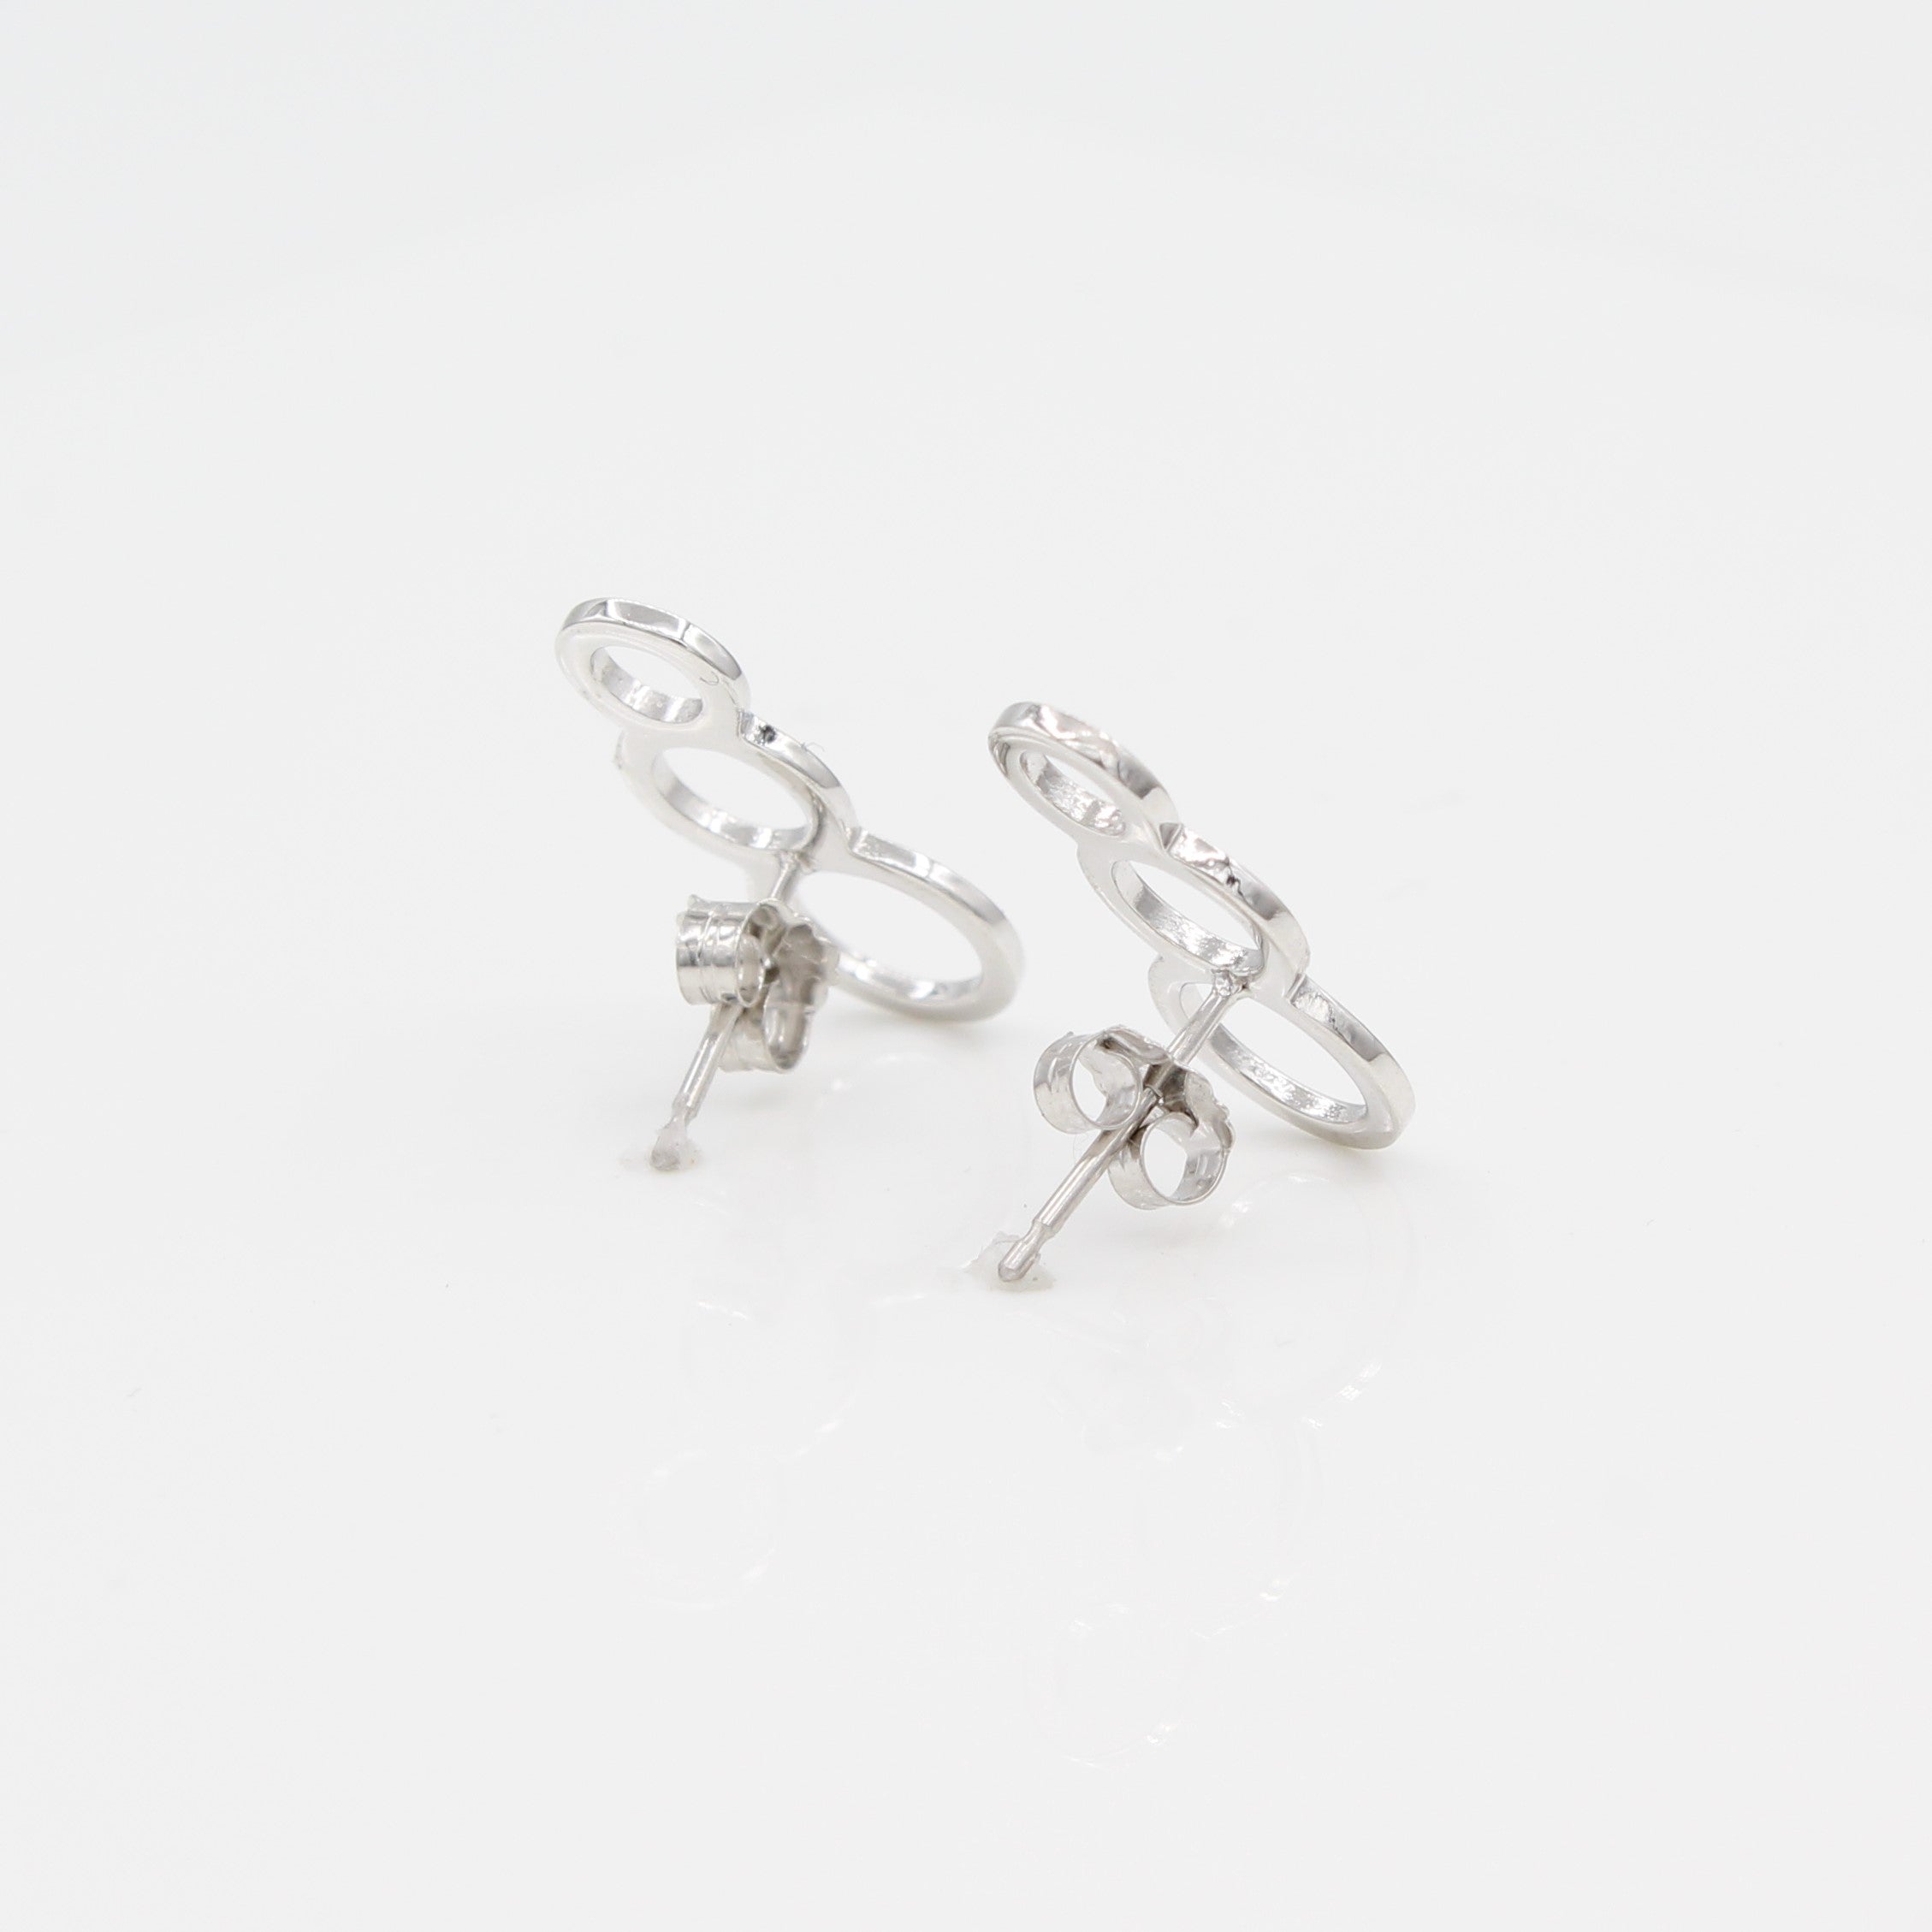 14k White Gold Bubble Ear Climbers Earrings with Posts, Back View